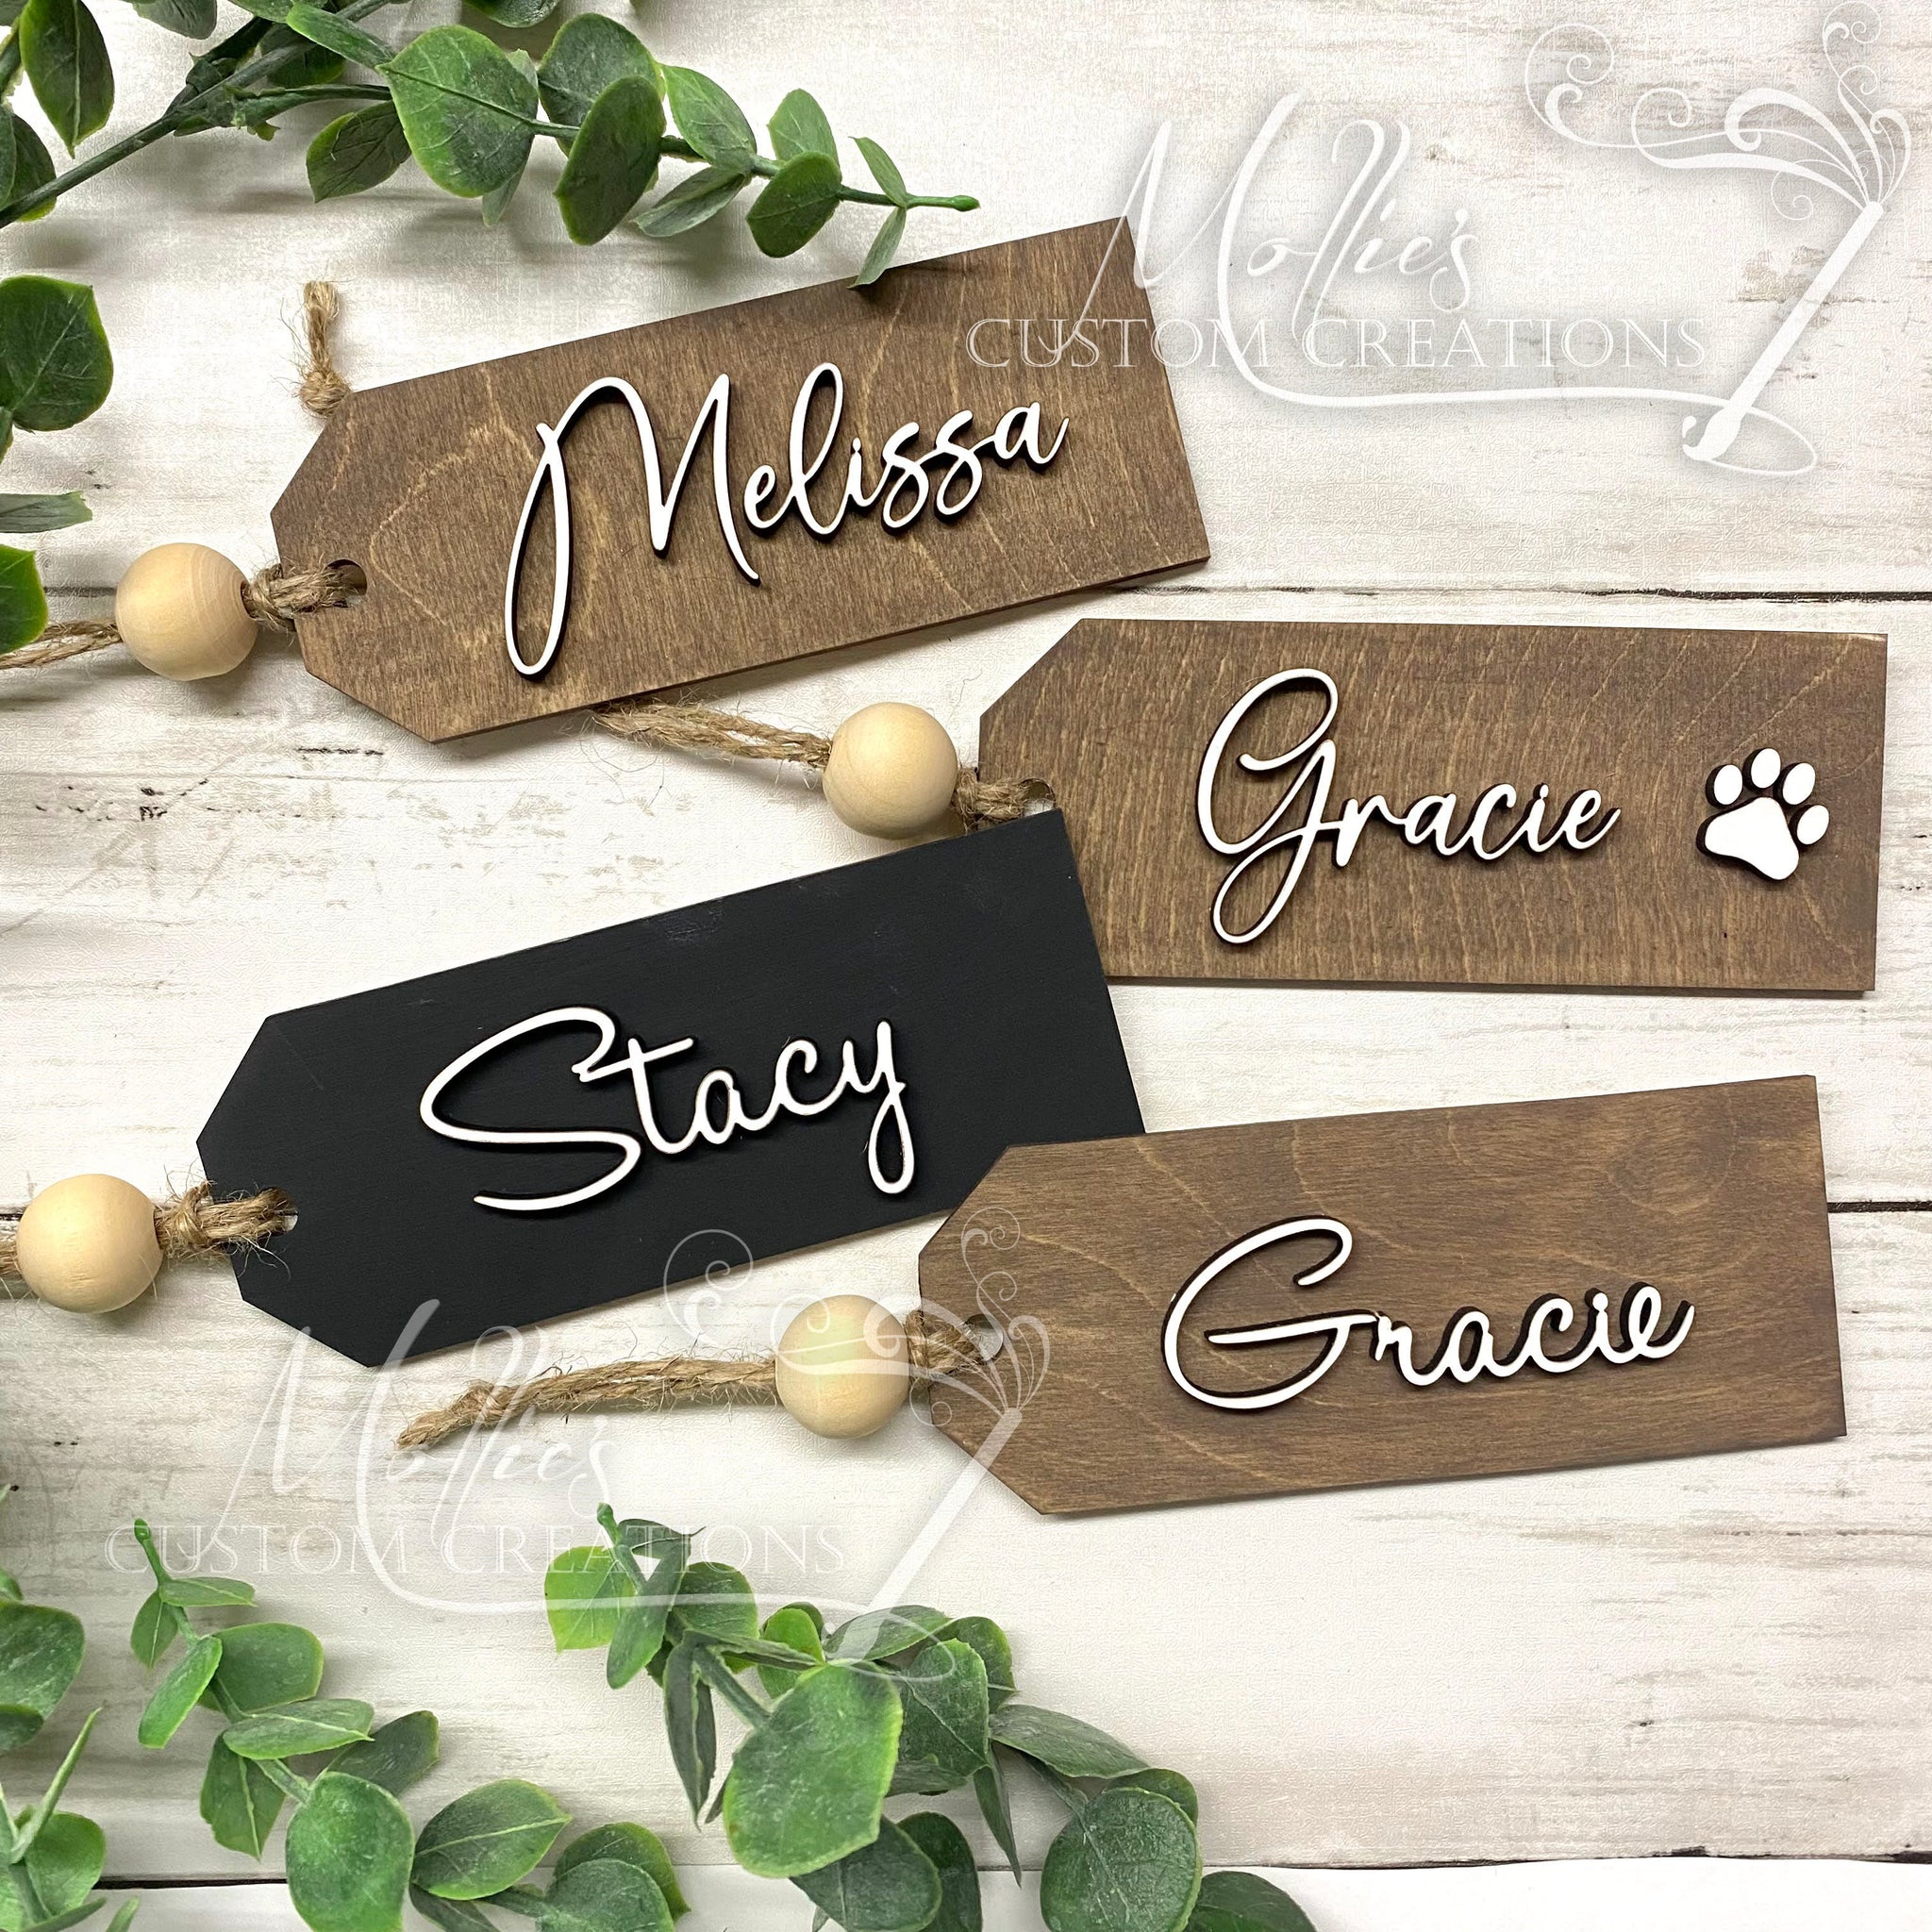 Cursive Stocking Name Tags, personalized name tags, personalized